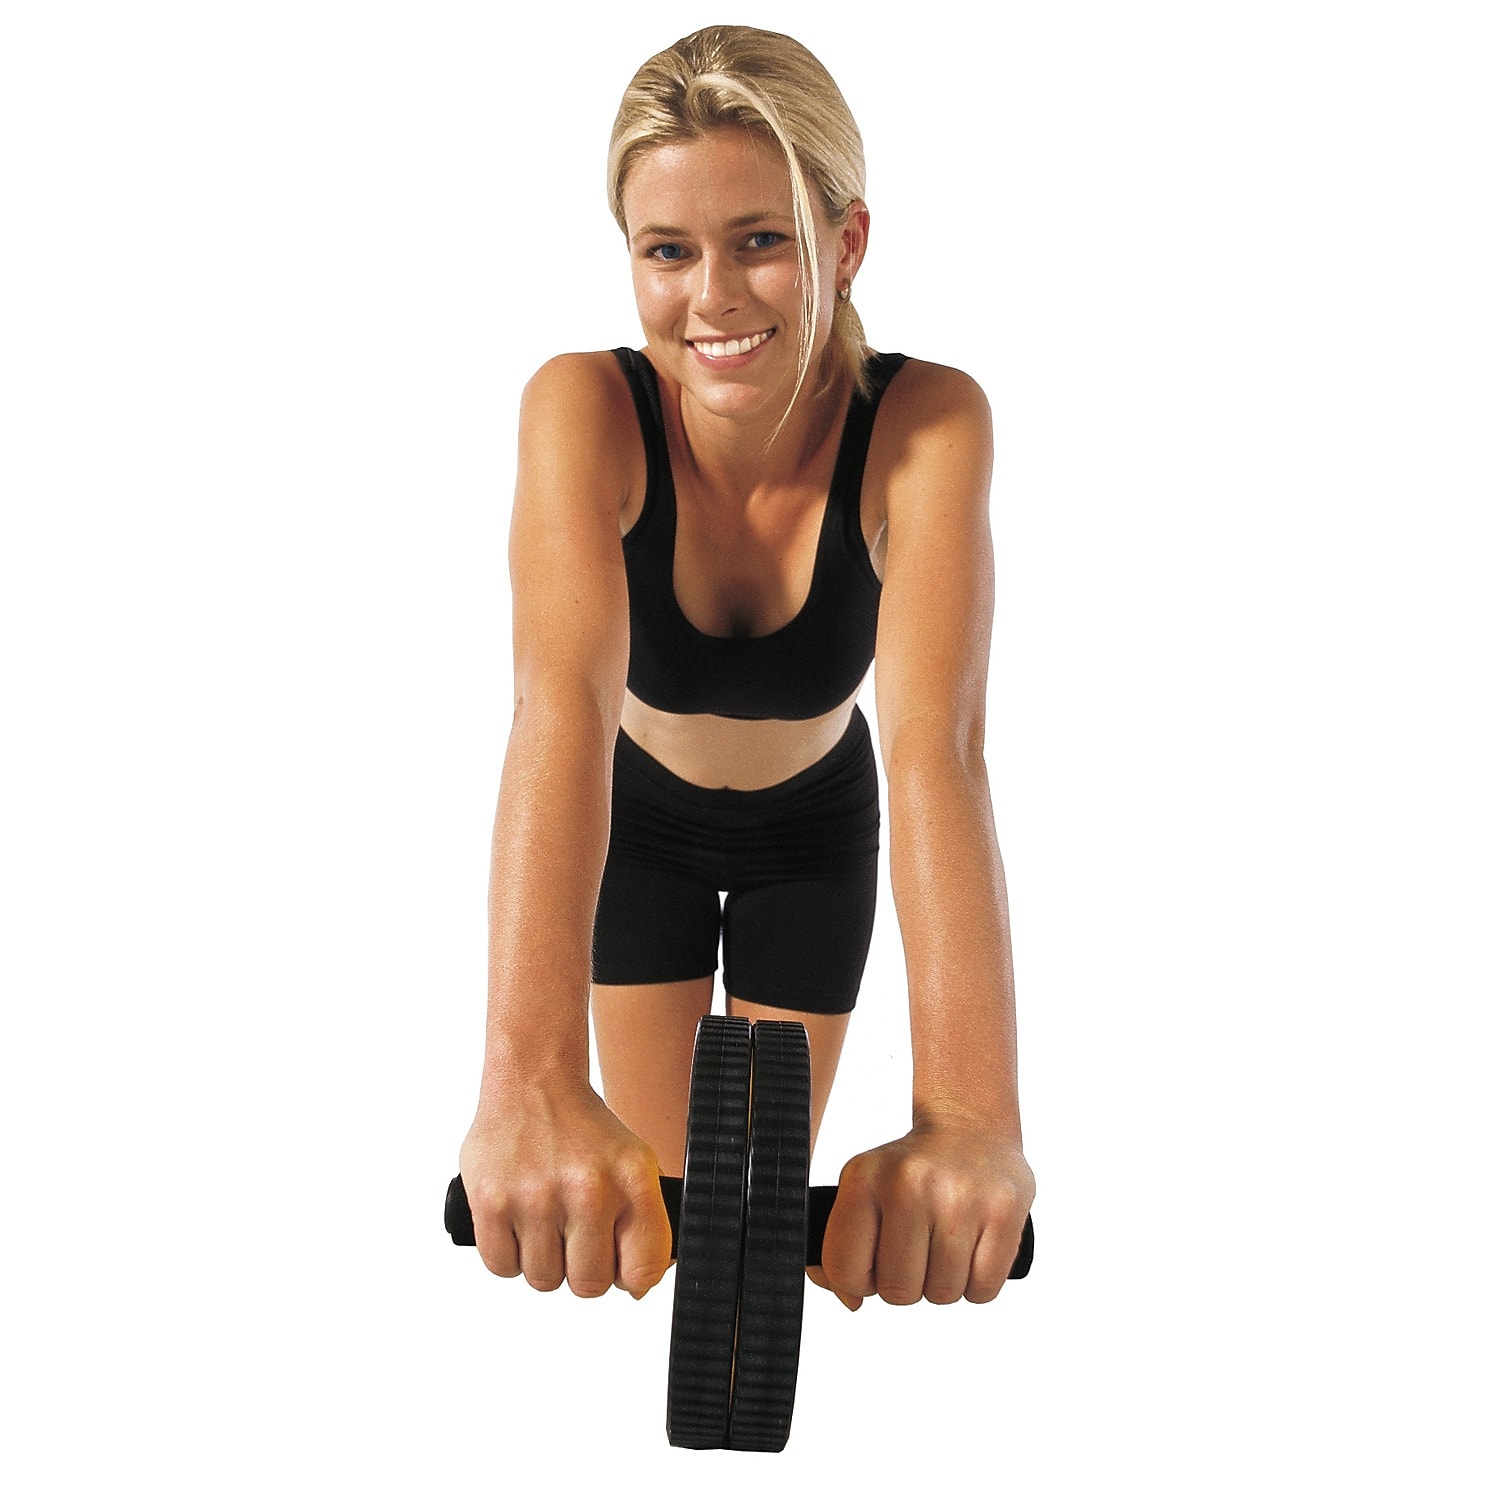 GoFit Dual Exercise Ab Wheel- Roller with Handles - image 4 of 5